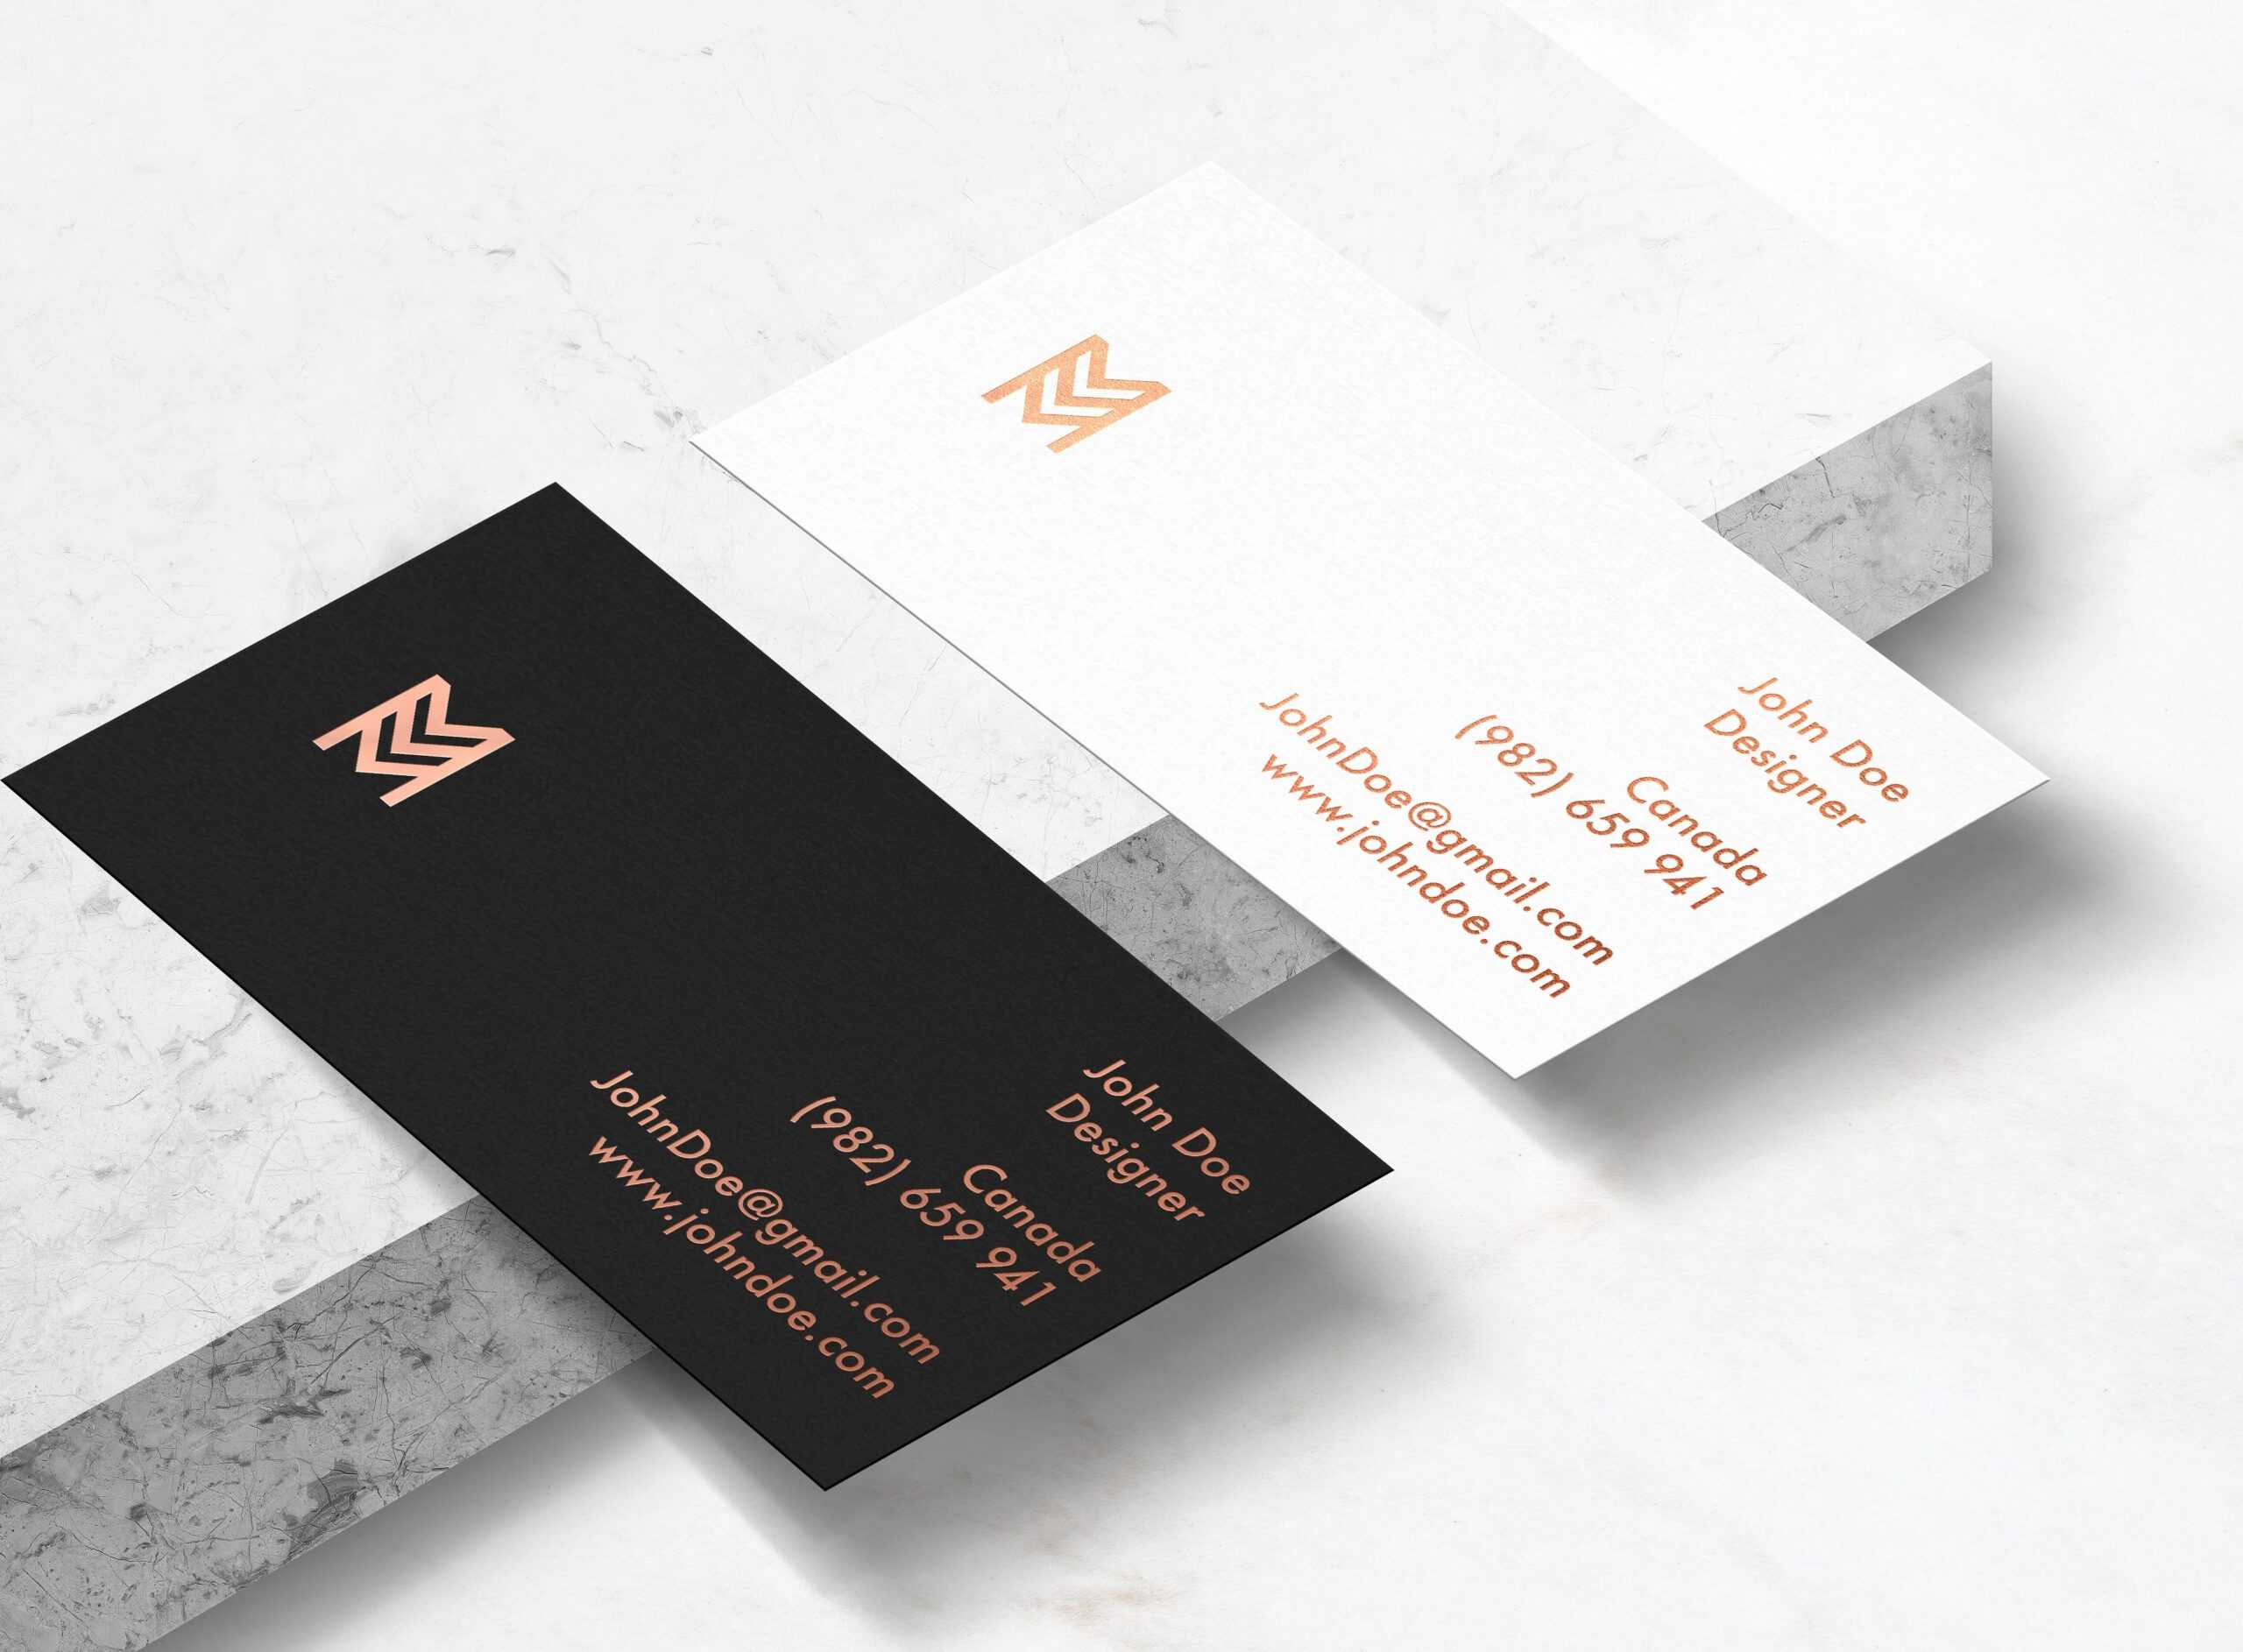 Instant Business Cards London Machines Small Credit Approval Intended For Decision Card Template